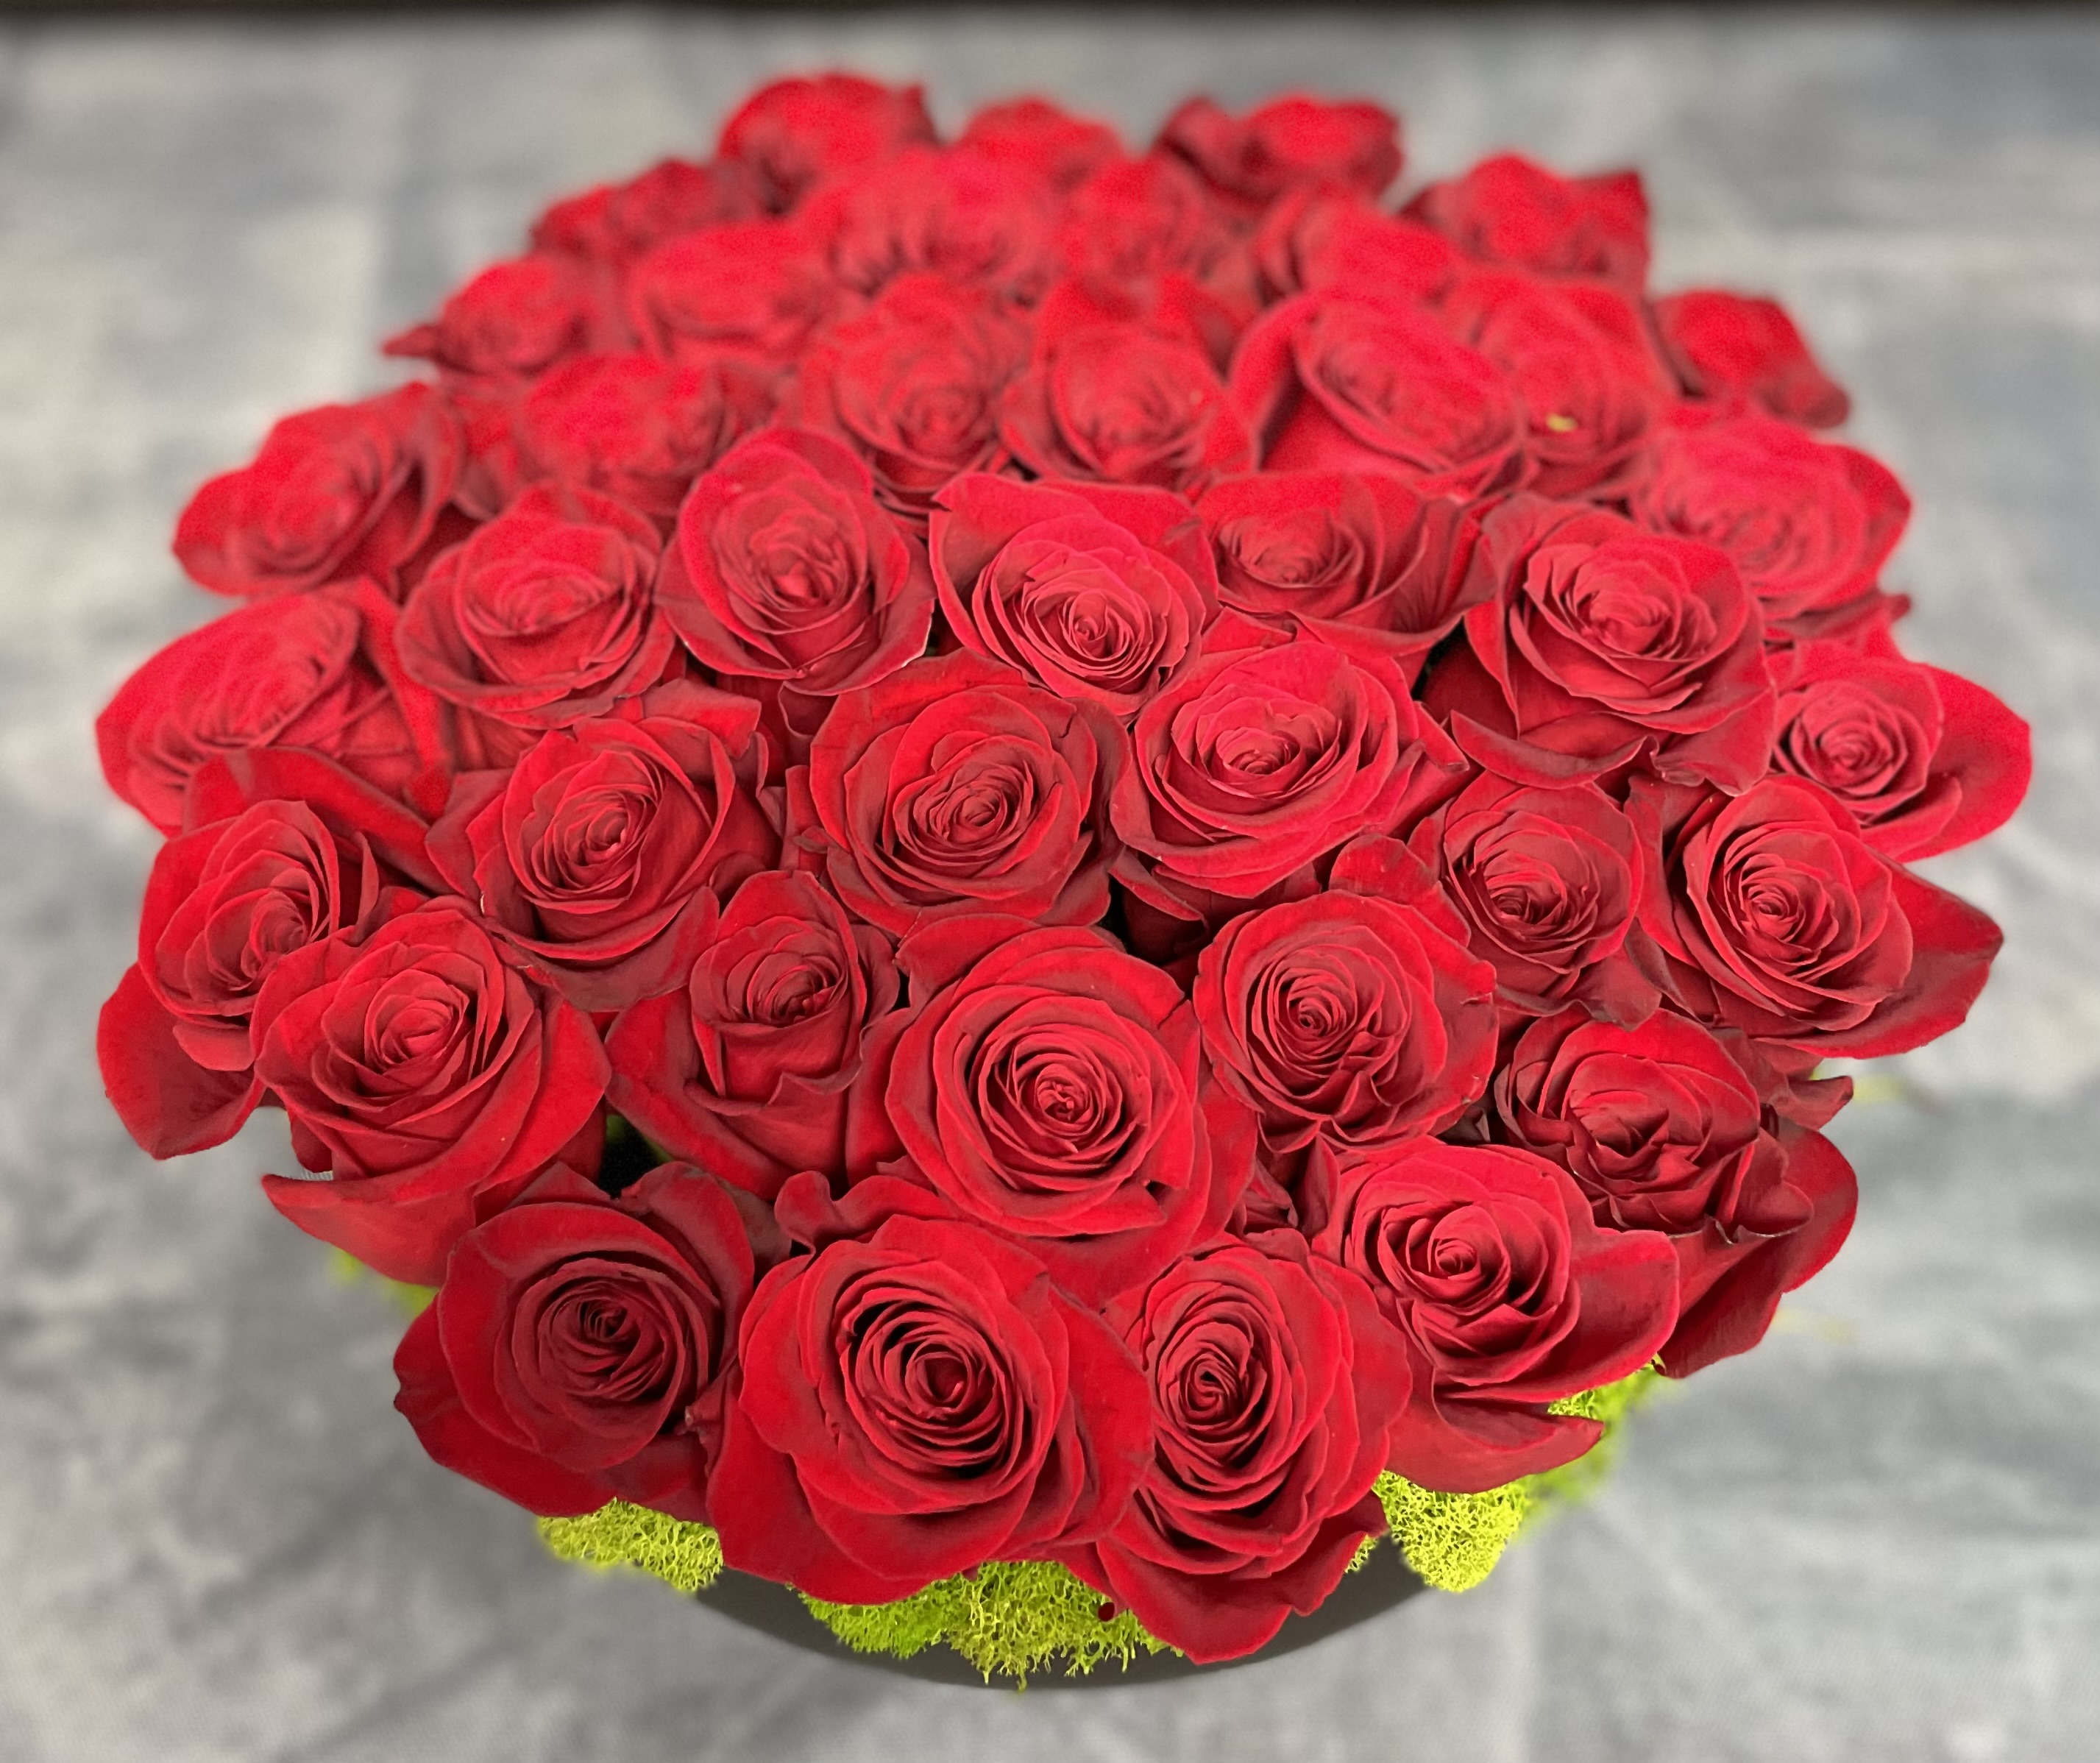 Moulin Rouge - 40 stems of red roses with chic black ceramic container.